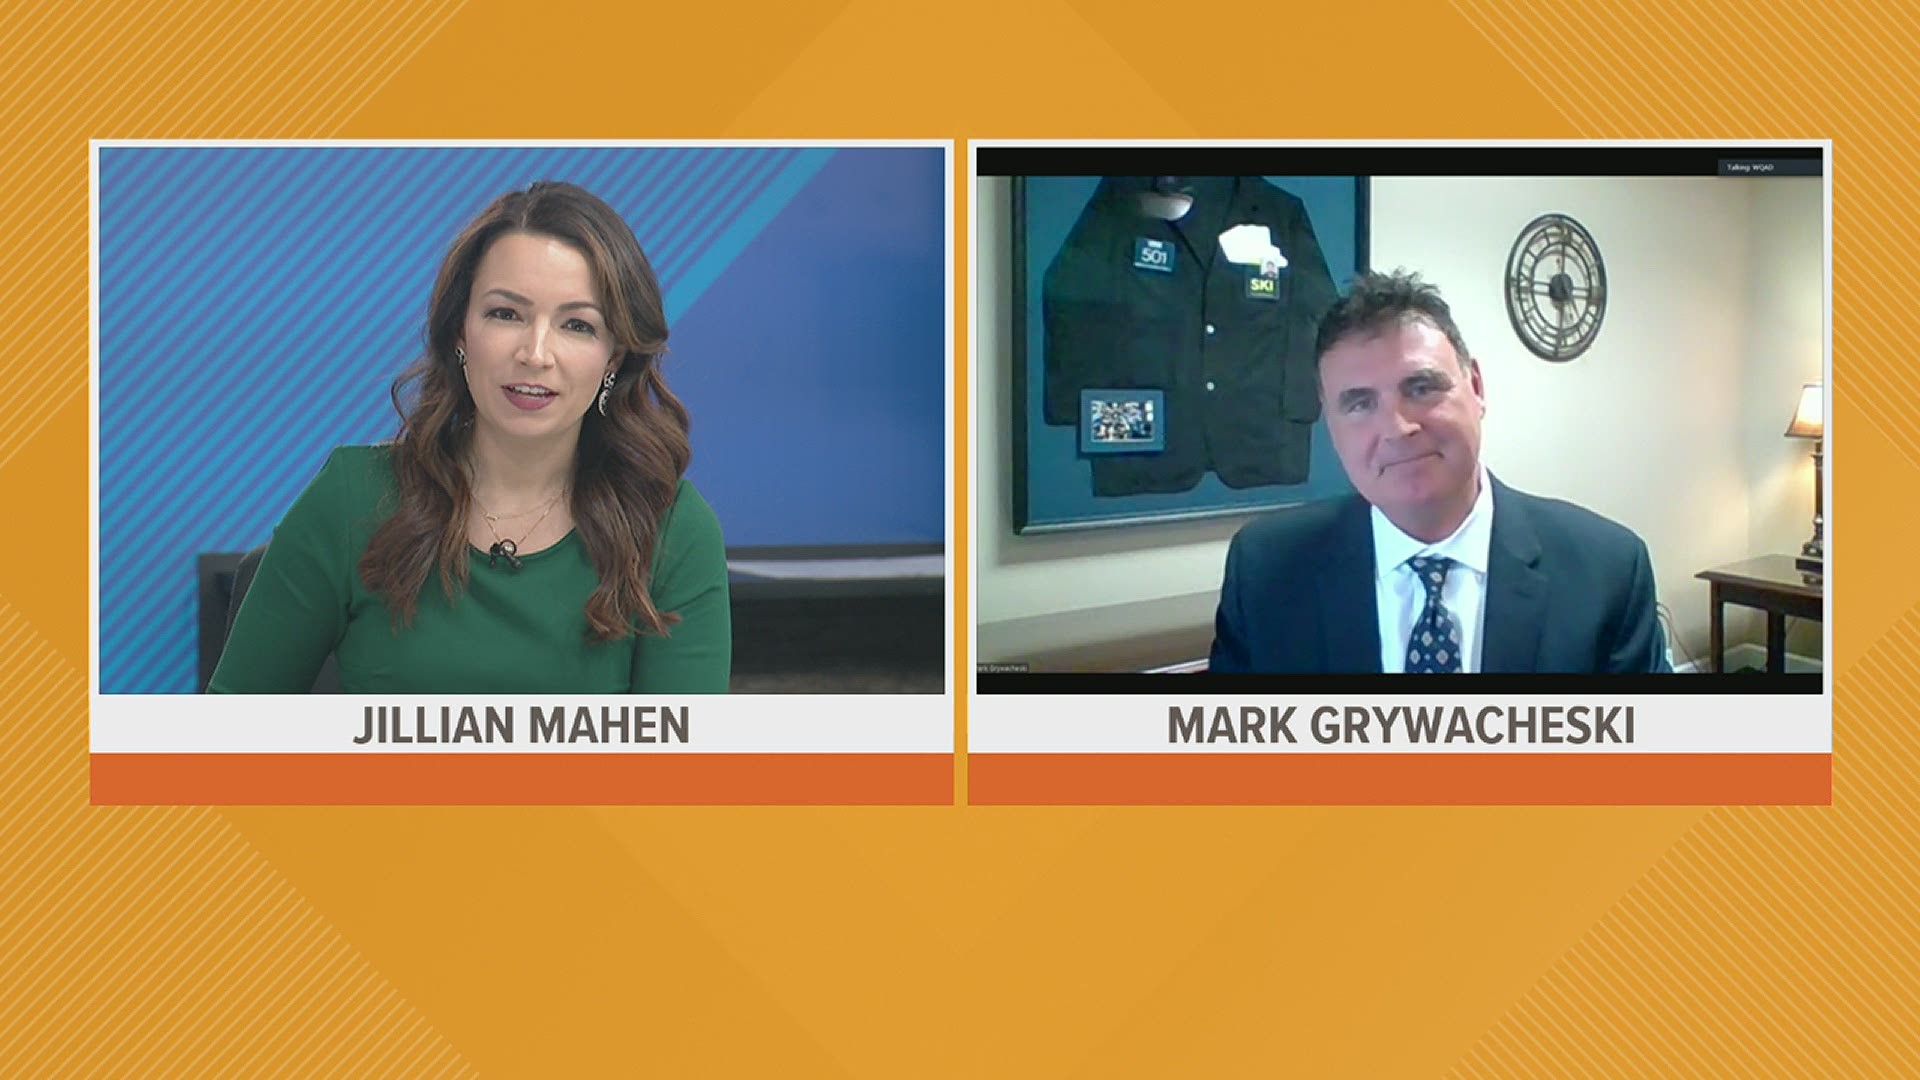 We check in with Mark Grywacheski after a weekend of all-time highs in the stock market.